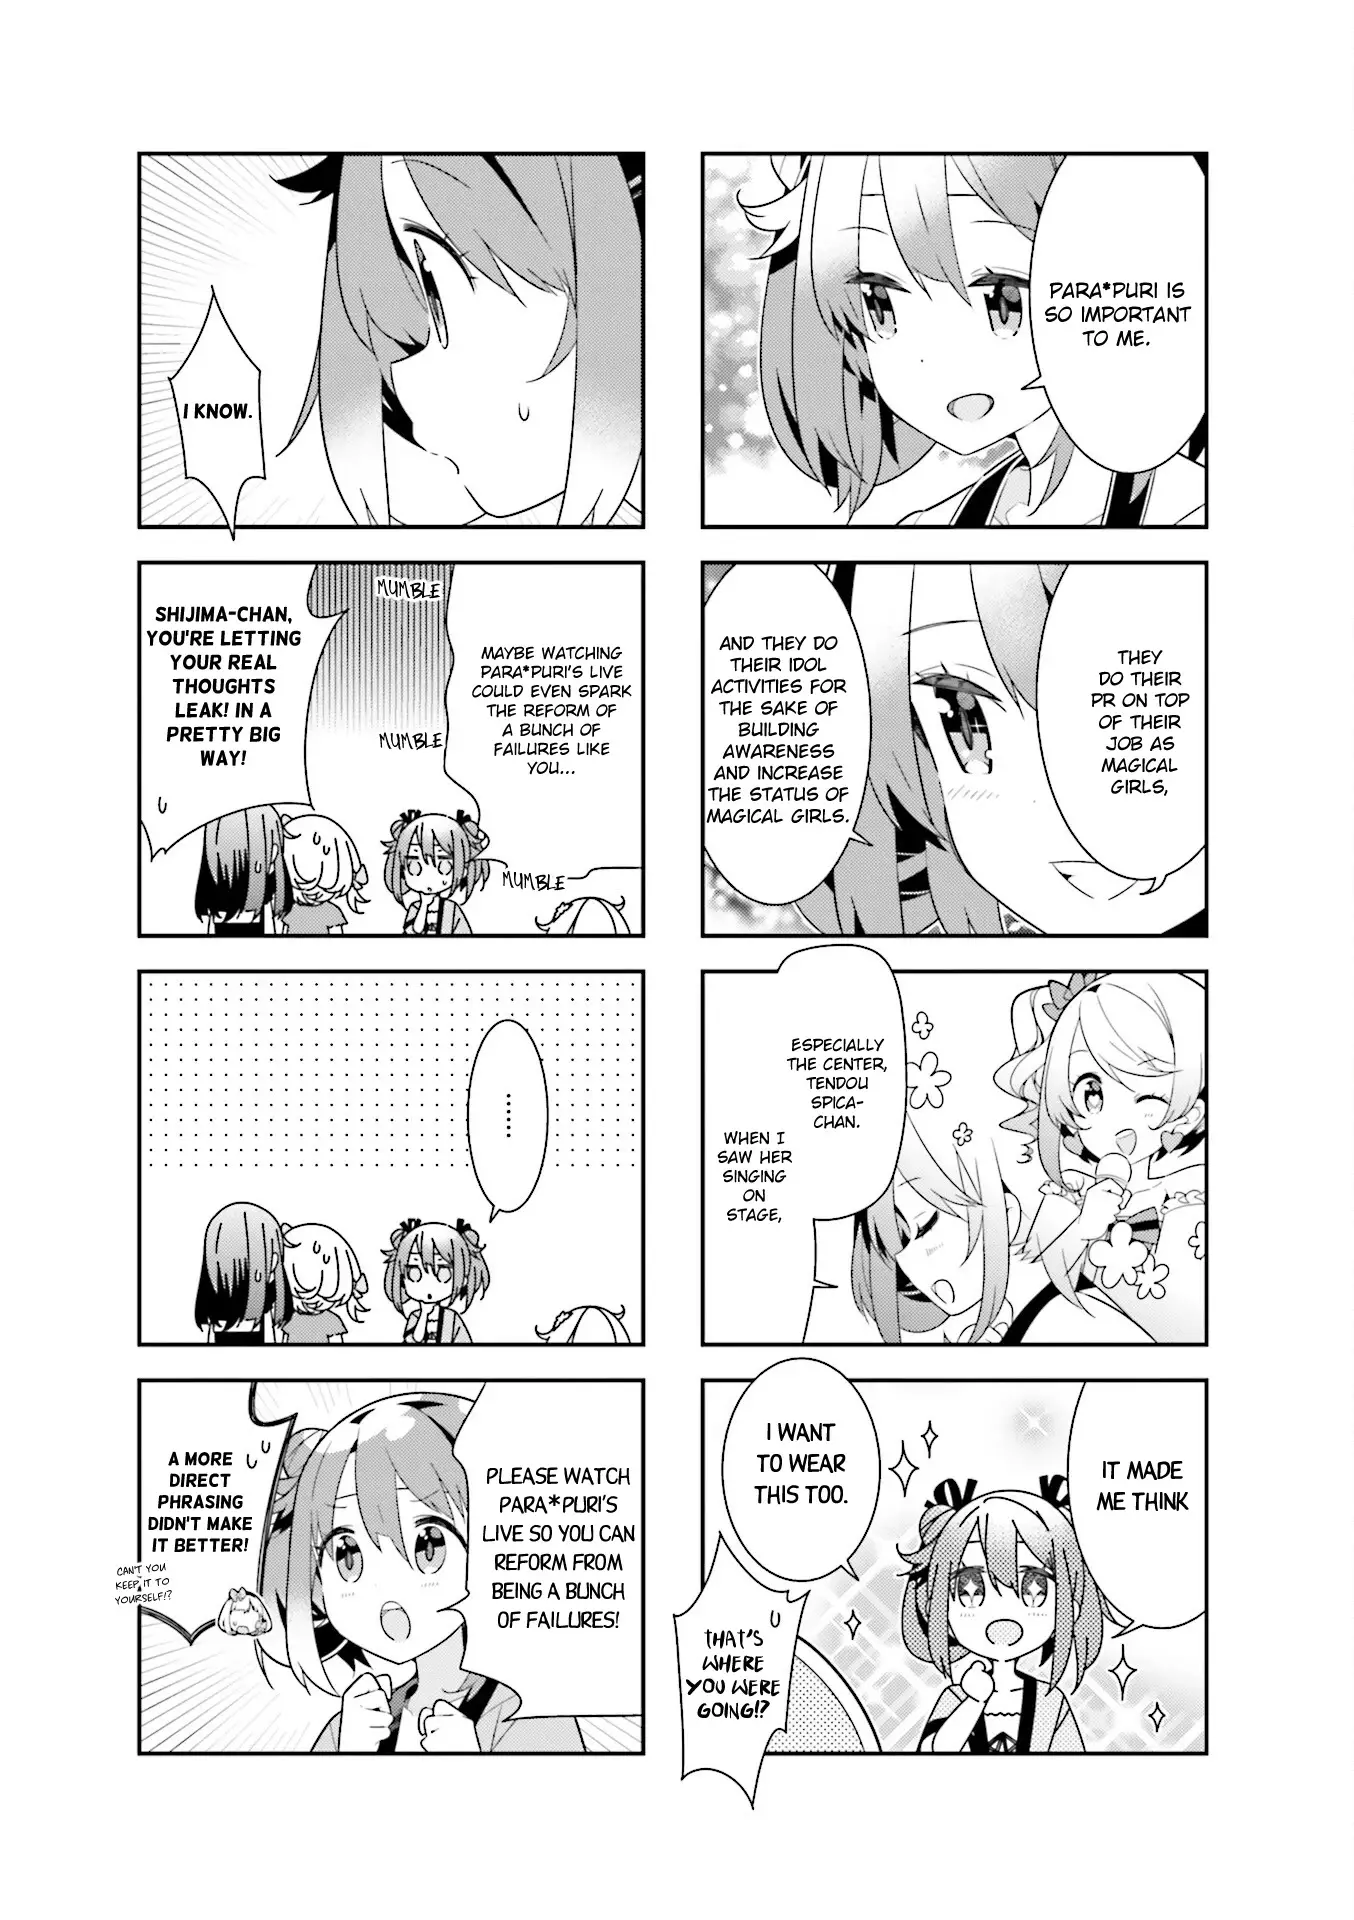 The Life After Retirement Of Magical Girls - 14 page 3-98e2aa69